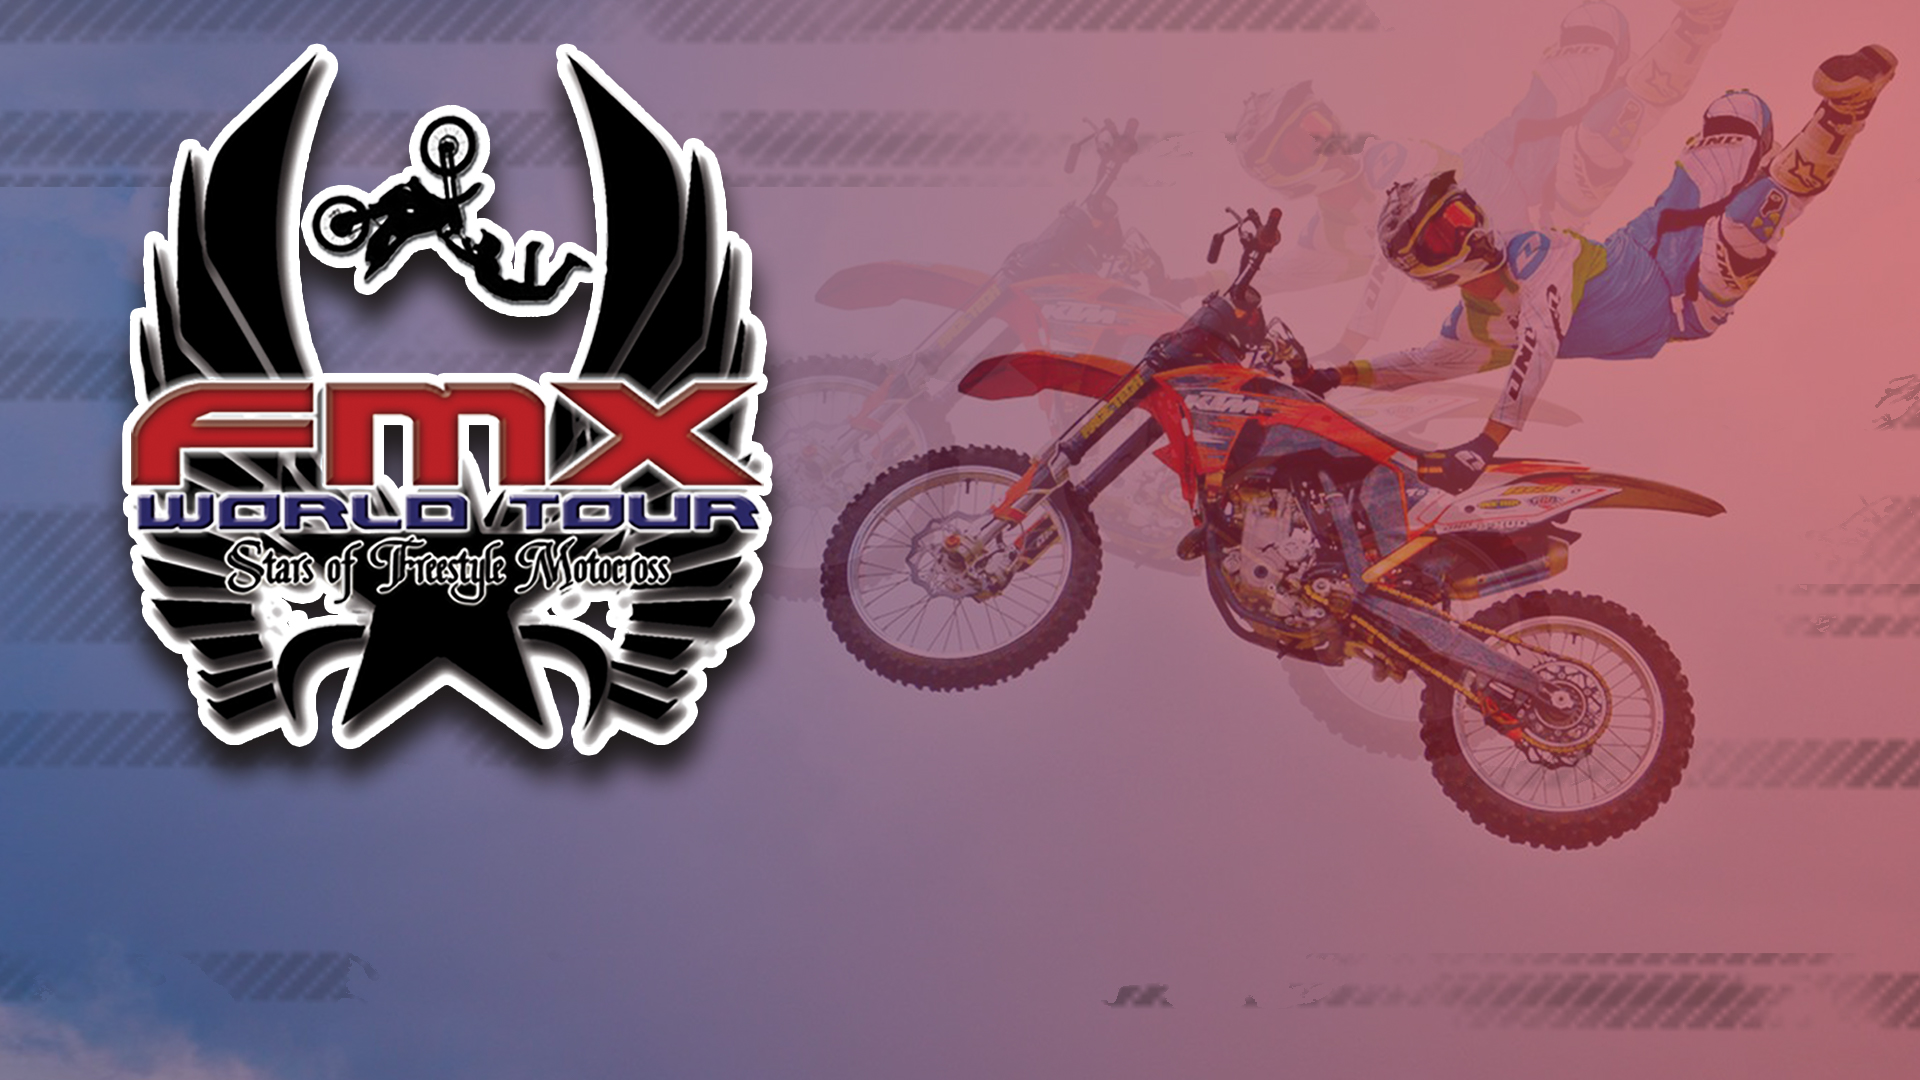 Freestyle Motocross Tour at the South Okanagan Events Centre in Penticton, BC on Saturday, February 2